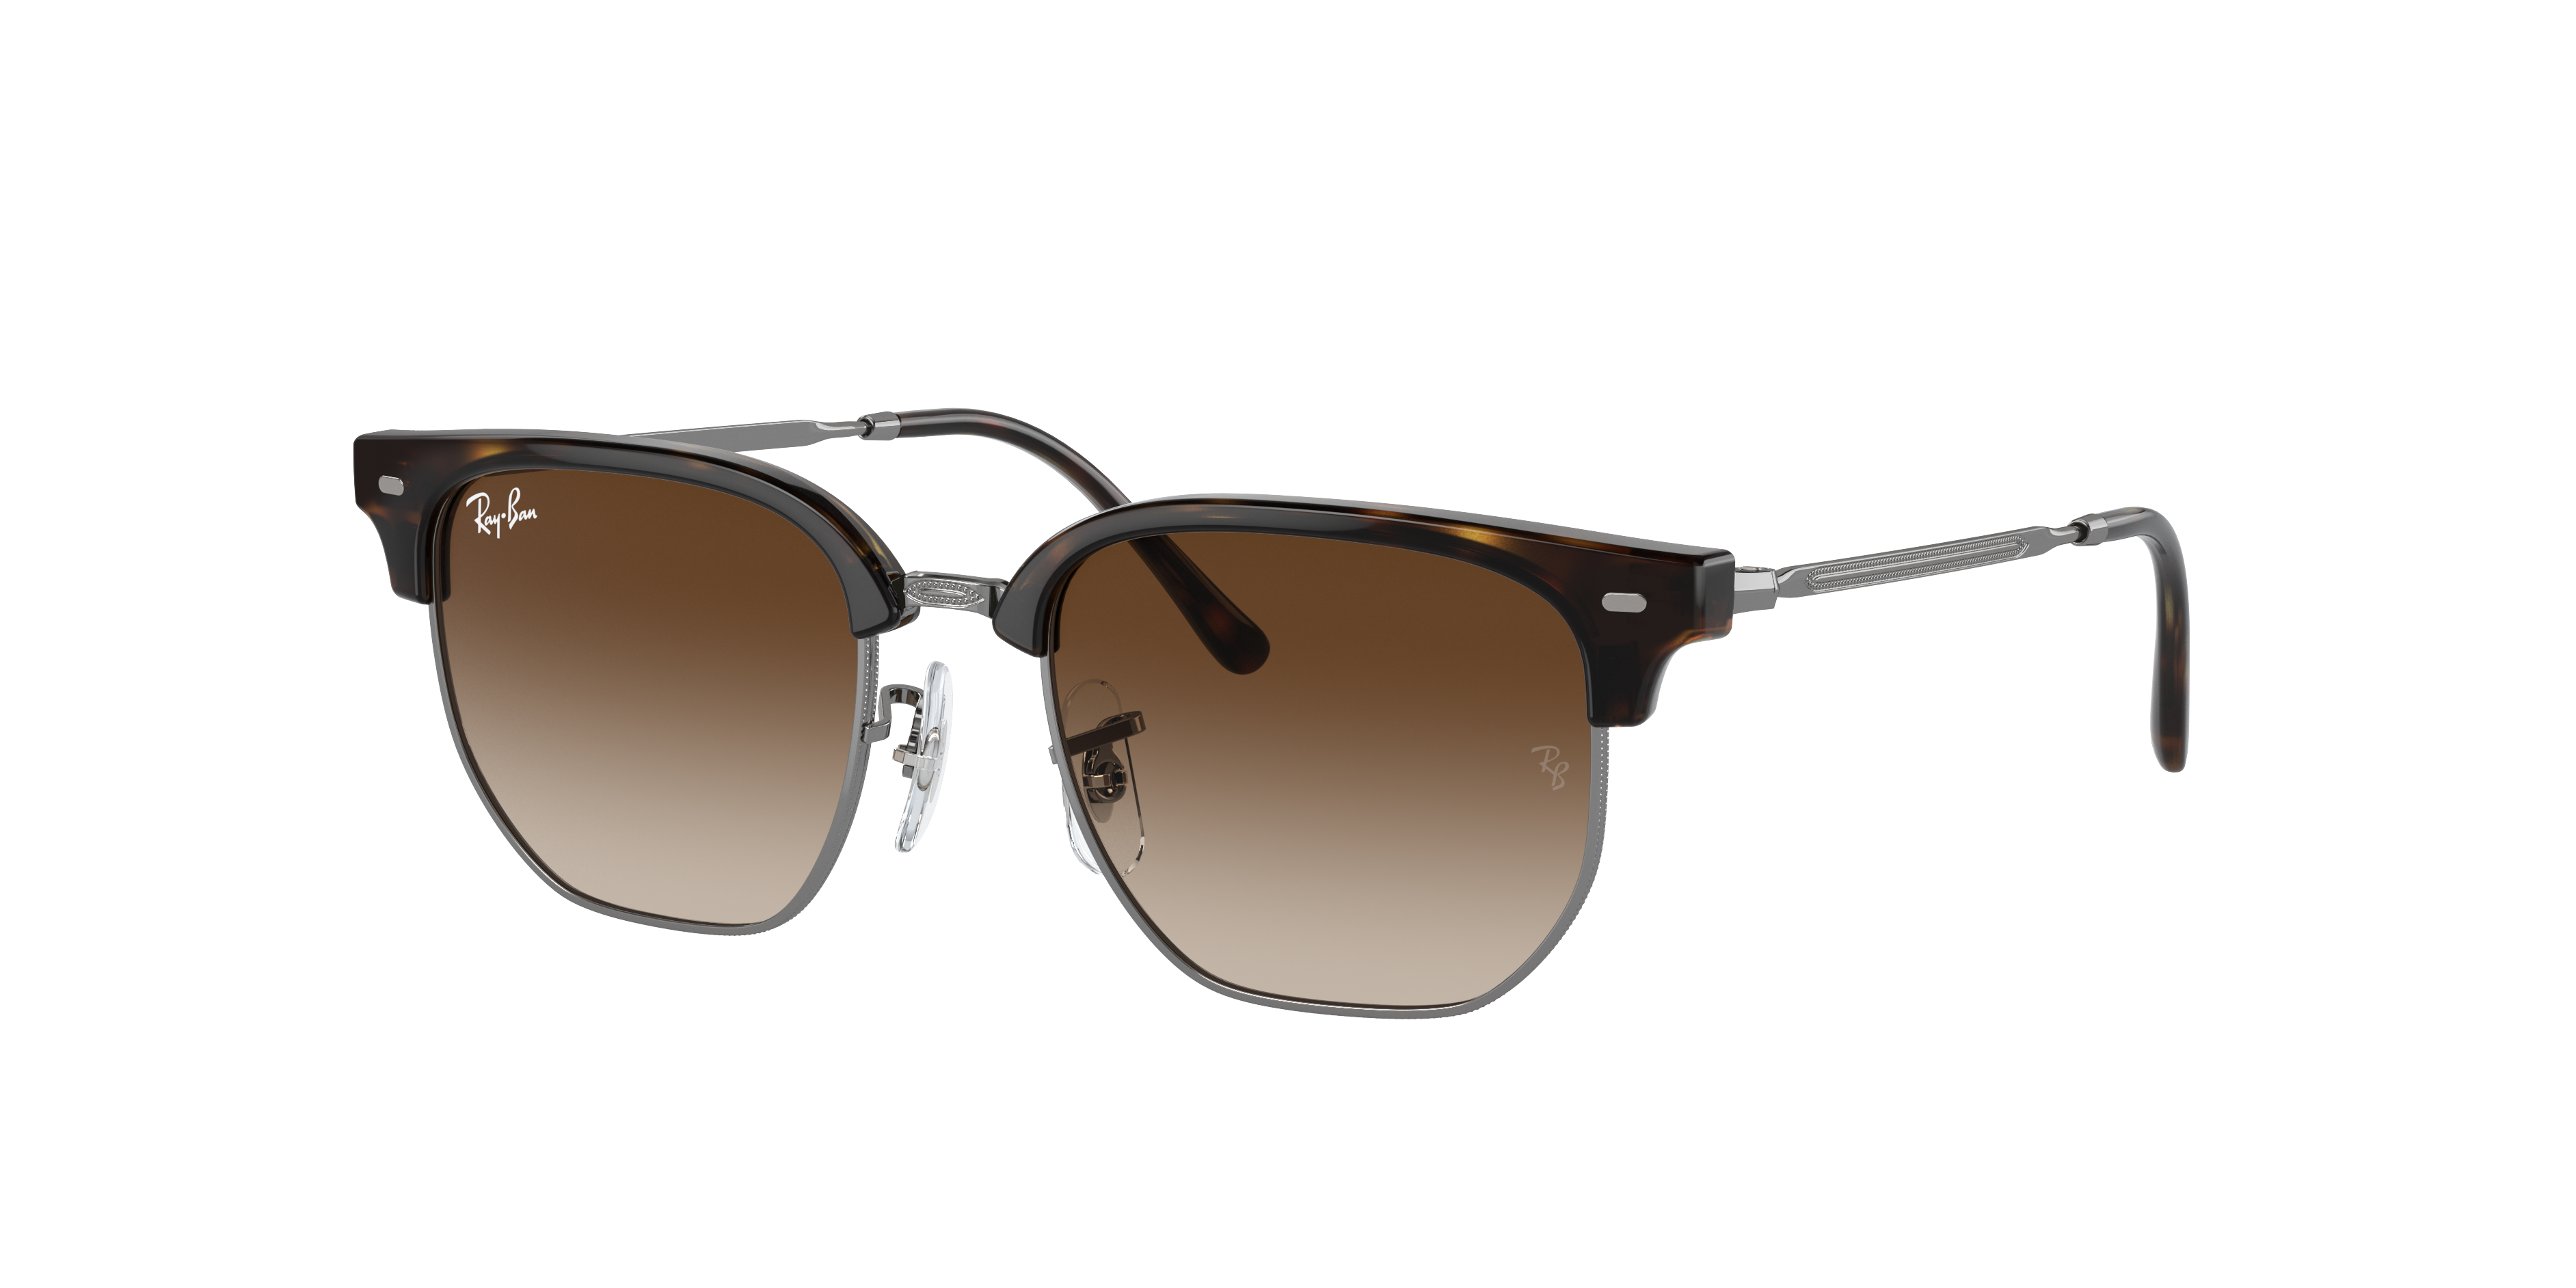 New Clubmaster Kids Sunglasses in Havana On Gunmetal and Brown ...